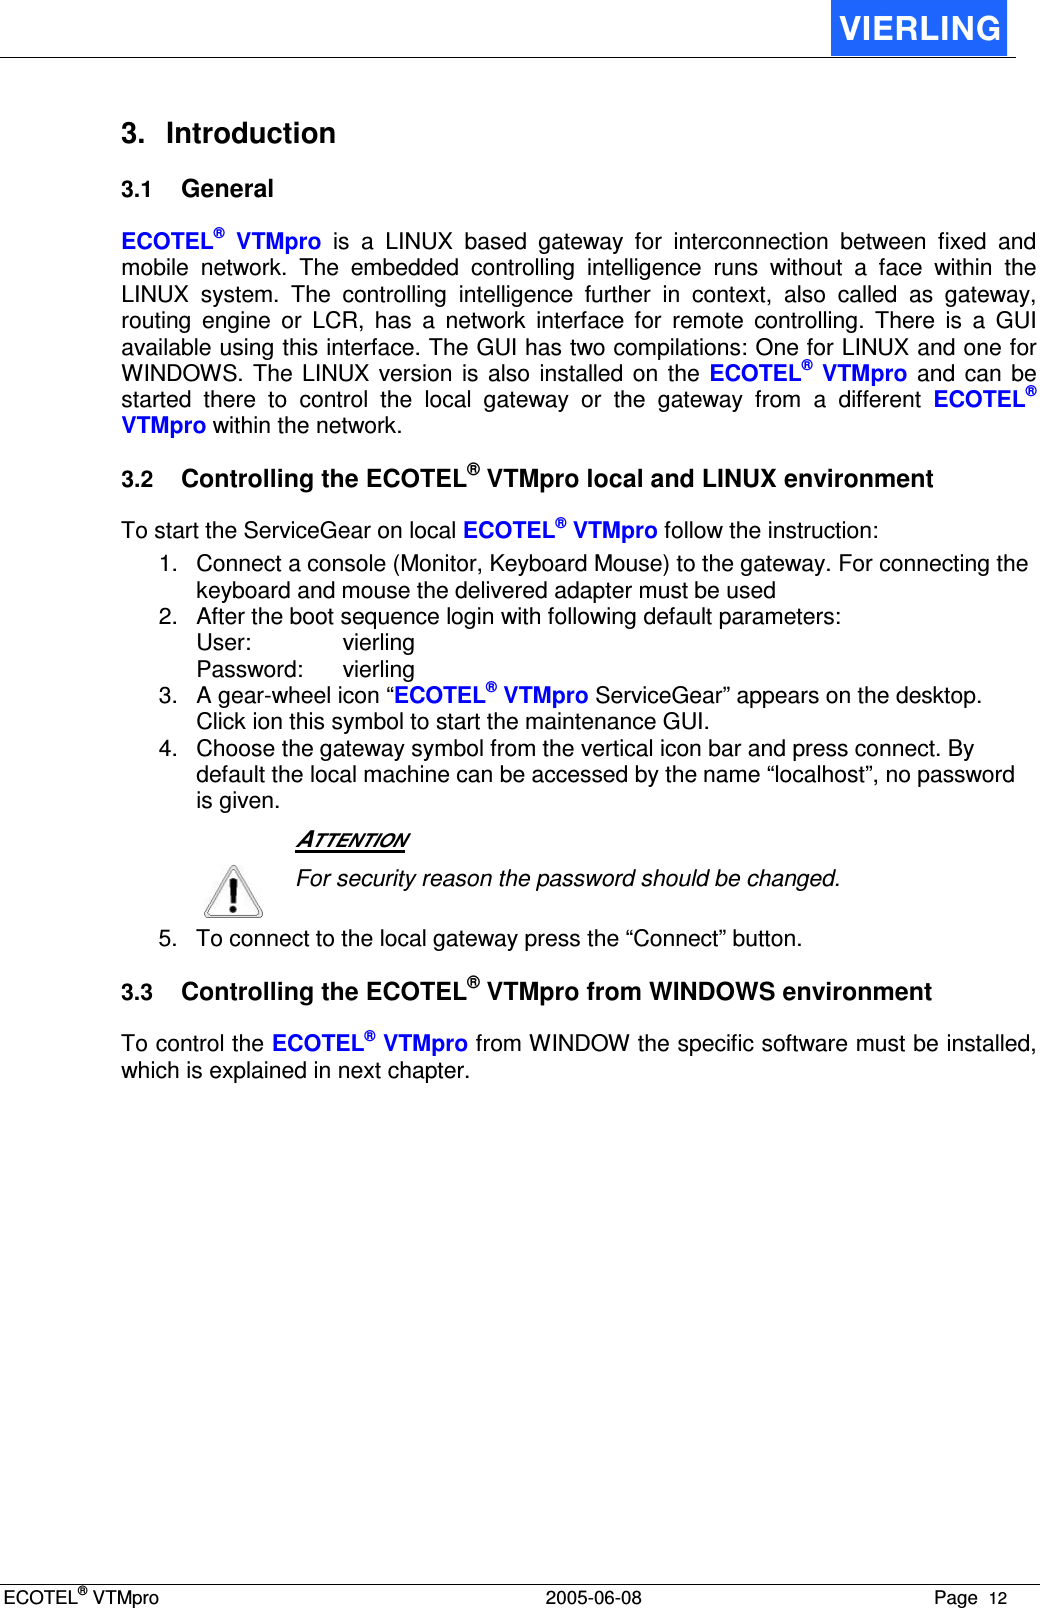 ECOTEL® VTMpro  2005-06-08 Page  12    3.  Introduction 3.1 General ECOTEL®  VTMpro  is  a  LINUX  based  gateway  for  interconnection  between  fixed  and mobile  network.  The  embedded  controlling  intelligence  runs  without  a  face  within  the LINUX  system.  The  controlling  intelligence  further  in  context,  also  called  as  gateway, routing  engine  or  LCR,  has  a  network  interface  for  remote  controlling.  There  is  a  GUI available using this interface. The GUI has two compilations: One for LINUX and one for WINDOWS.  The  LINUX  version is also installed  on  the  ECOTEL®  VTMpro  and  can  be started  there  to  control  the  local  gateway  or  the  gateway  from  a  different  ECOTEL® VTMpro within the network. 3.2 Controlling the ECOTEL® VTMpro local and LINUX environment To start the ServiceGear on local ECOTEL® VTMpro follow the instruction: 1.  Connect a console (Monitor, Keyboard Mouse) to the gateway. For connecting the keyboard and mouse the delivered adapter must be used 2.  After the boot sequence login with following default parameters: User:    vierling Password:  vierling 3.  A gear-wheel icon “ECOTEL® VTMpro ServiceGear” appears on the desktop. Click ion this symbol to start the maintenance GUI. 4.  Choose the gateway symbol from the vertical icon bar and press connect. By default the local machine can be accessed by the name “localhost”, no password is given.   ATTENTION  For security reason the password should be changed. 5.  To connect to the local gateway press the “Connect” button. 3.3 Controlling the ECOTEL® VTMpro from WINDOWS environment To control the ECOTEL® VTMpro from WINDOW the specific software must be installed, which is explained in next chapter. 